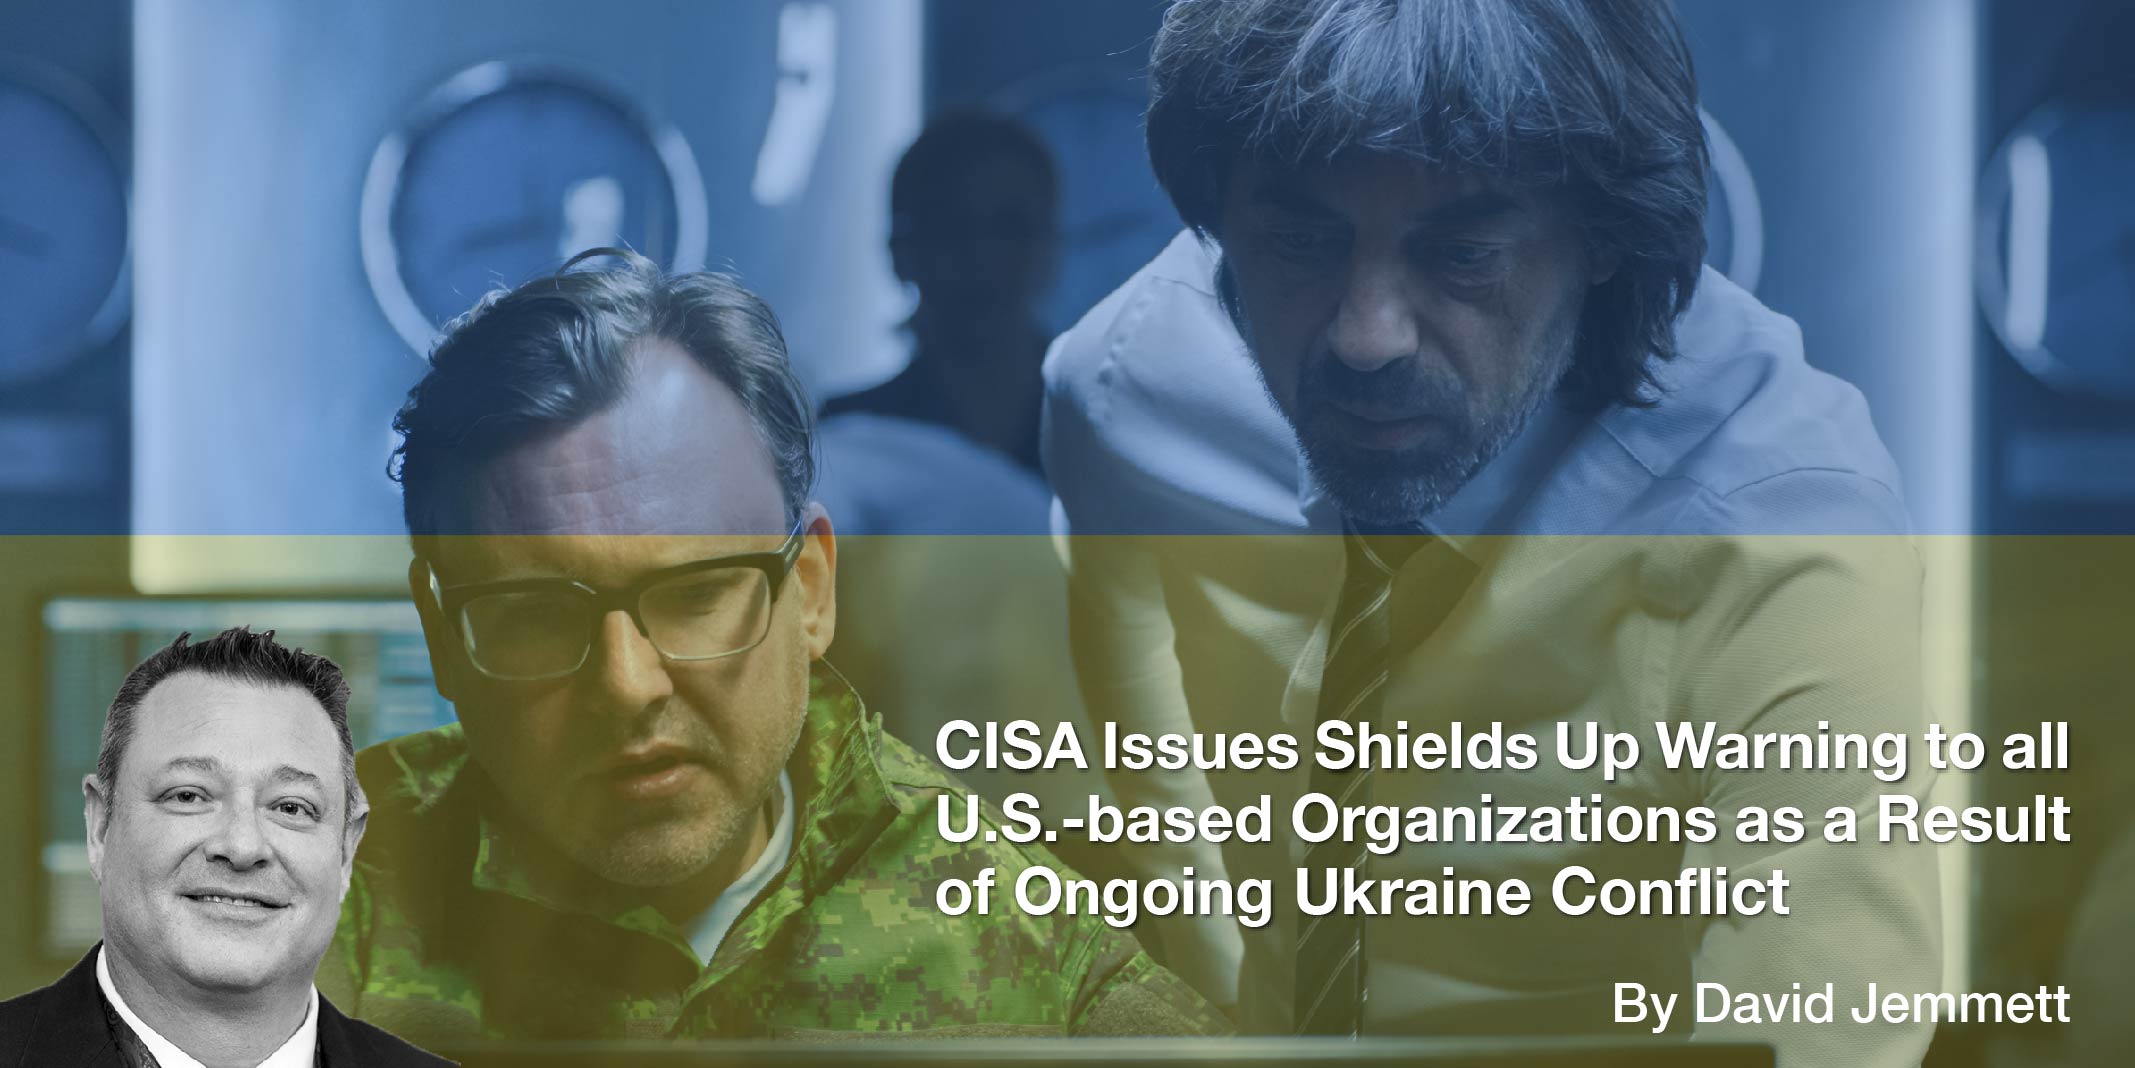 CISA Issues Shields Up Warning to all U.S.-based Organizations as a Result of Ongoing Ukraine Conflict